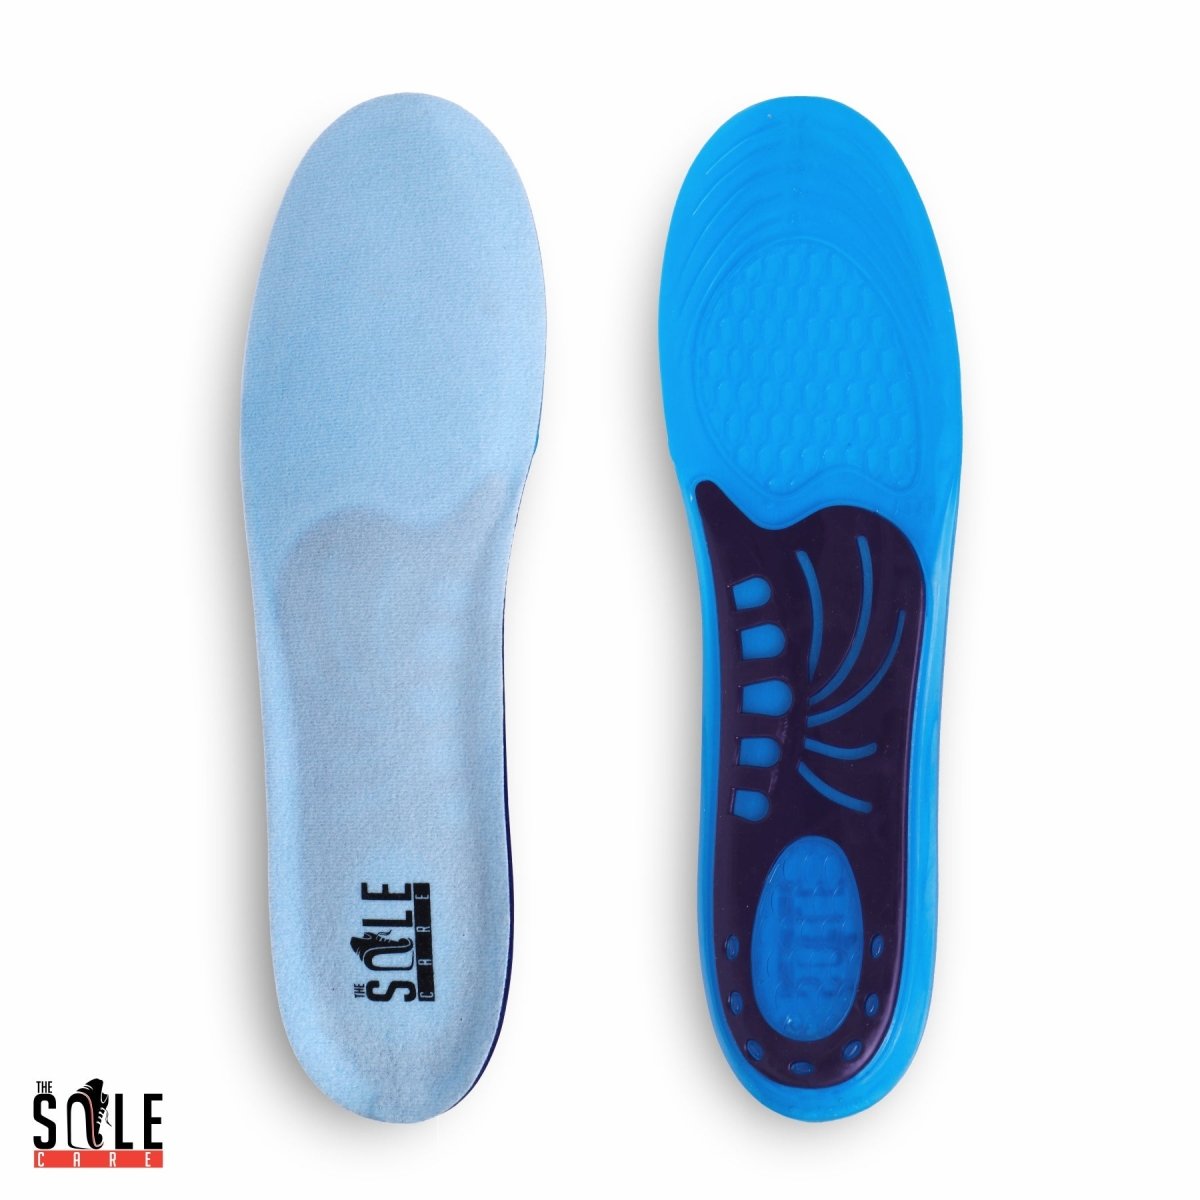 Silicone Orthotic Insoles: Boost Comfort for Every Step Shoe Insole- #Royalkart#insoles